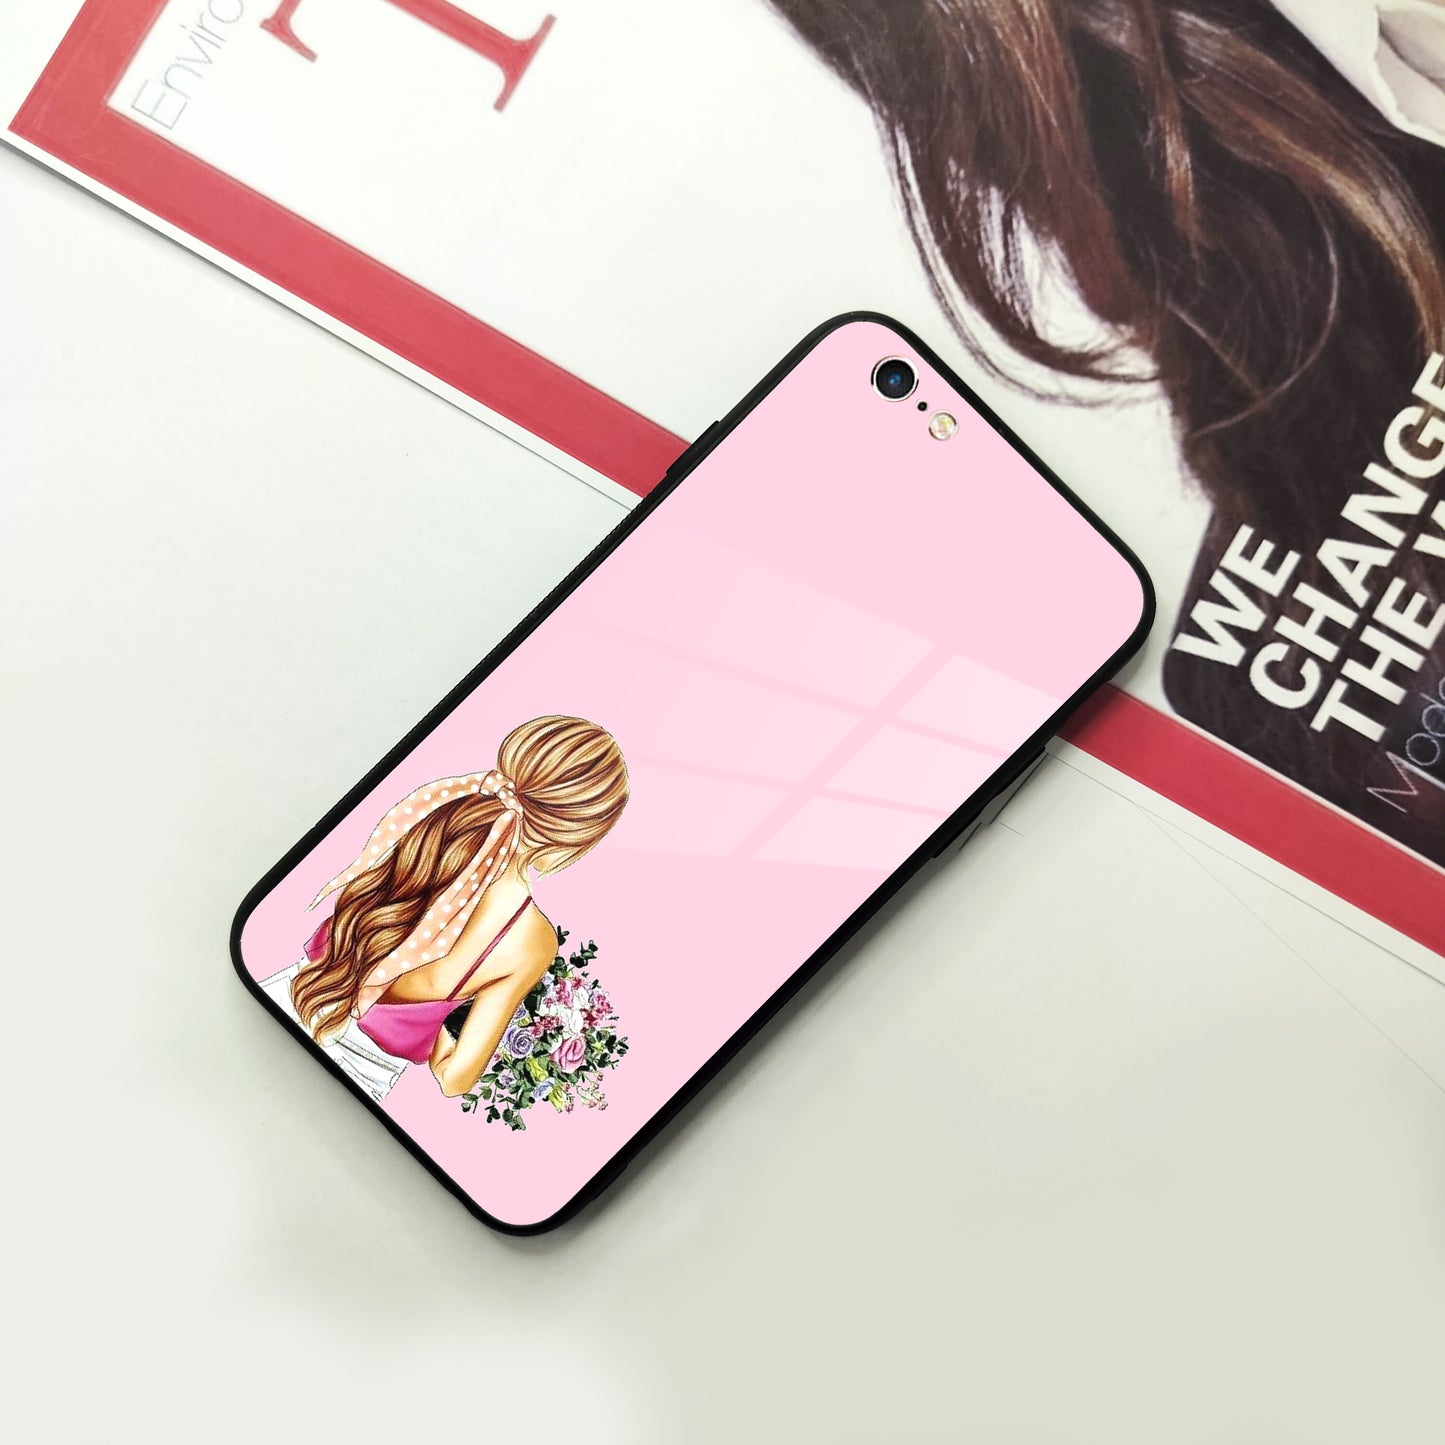 Styles Girl With Flower Glass Case For iPhone